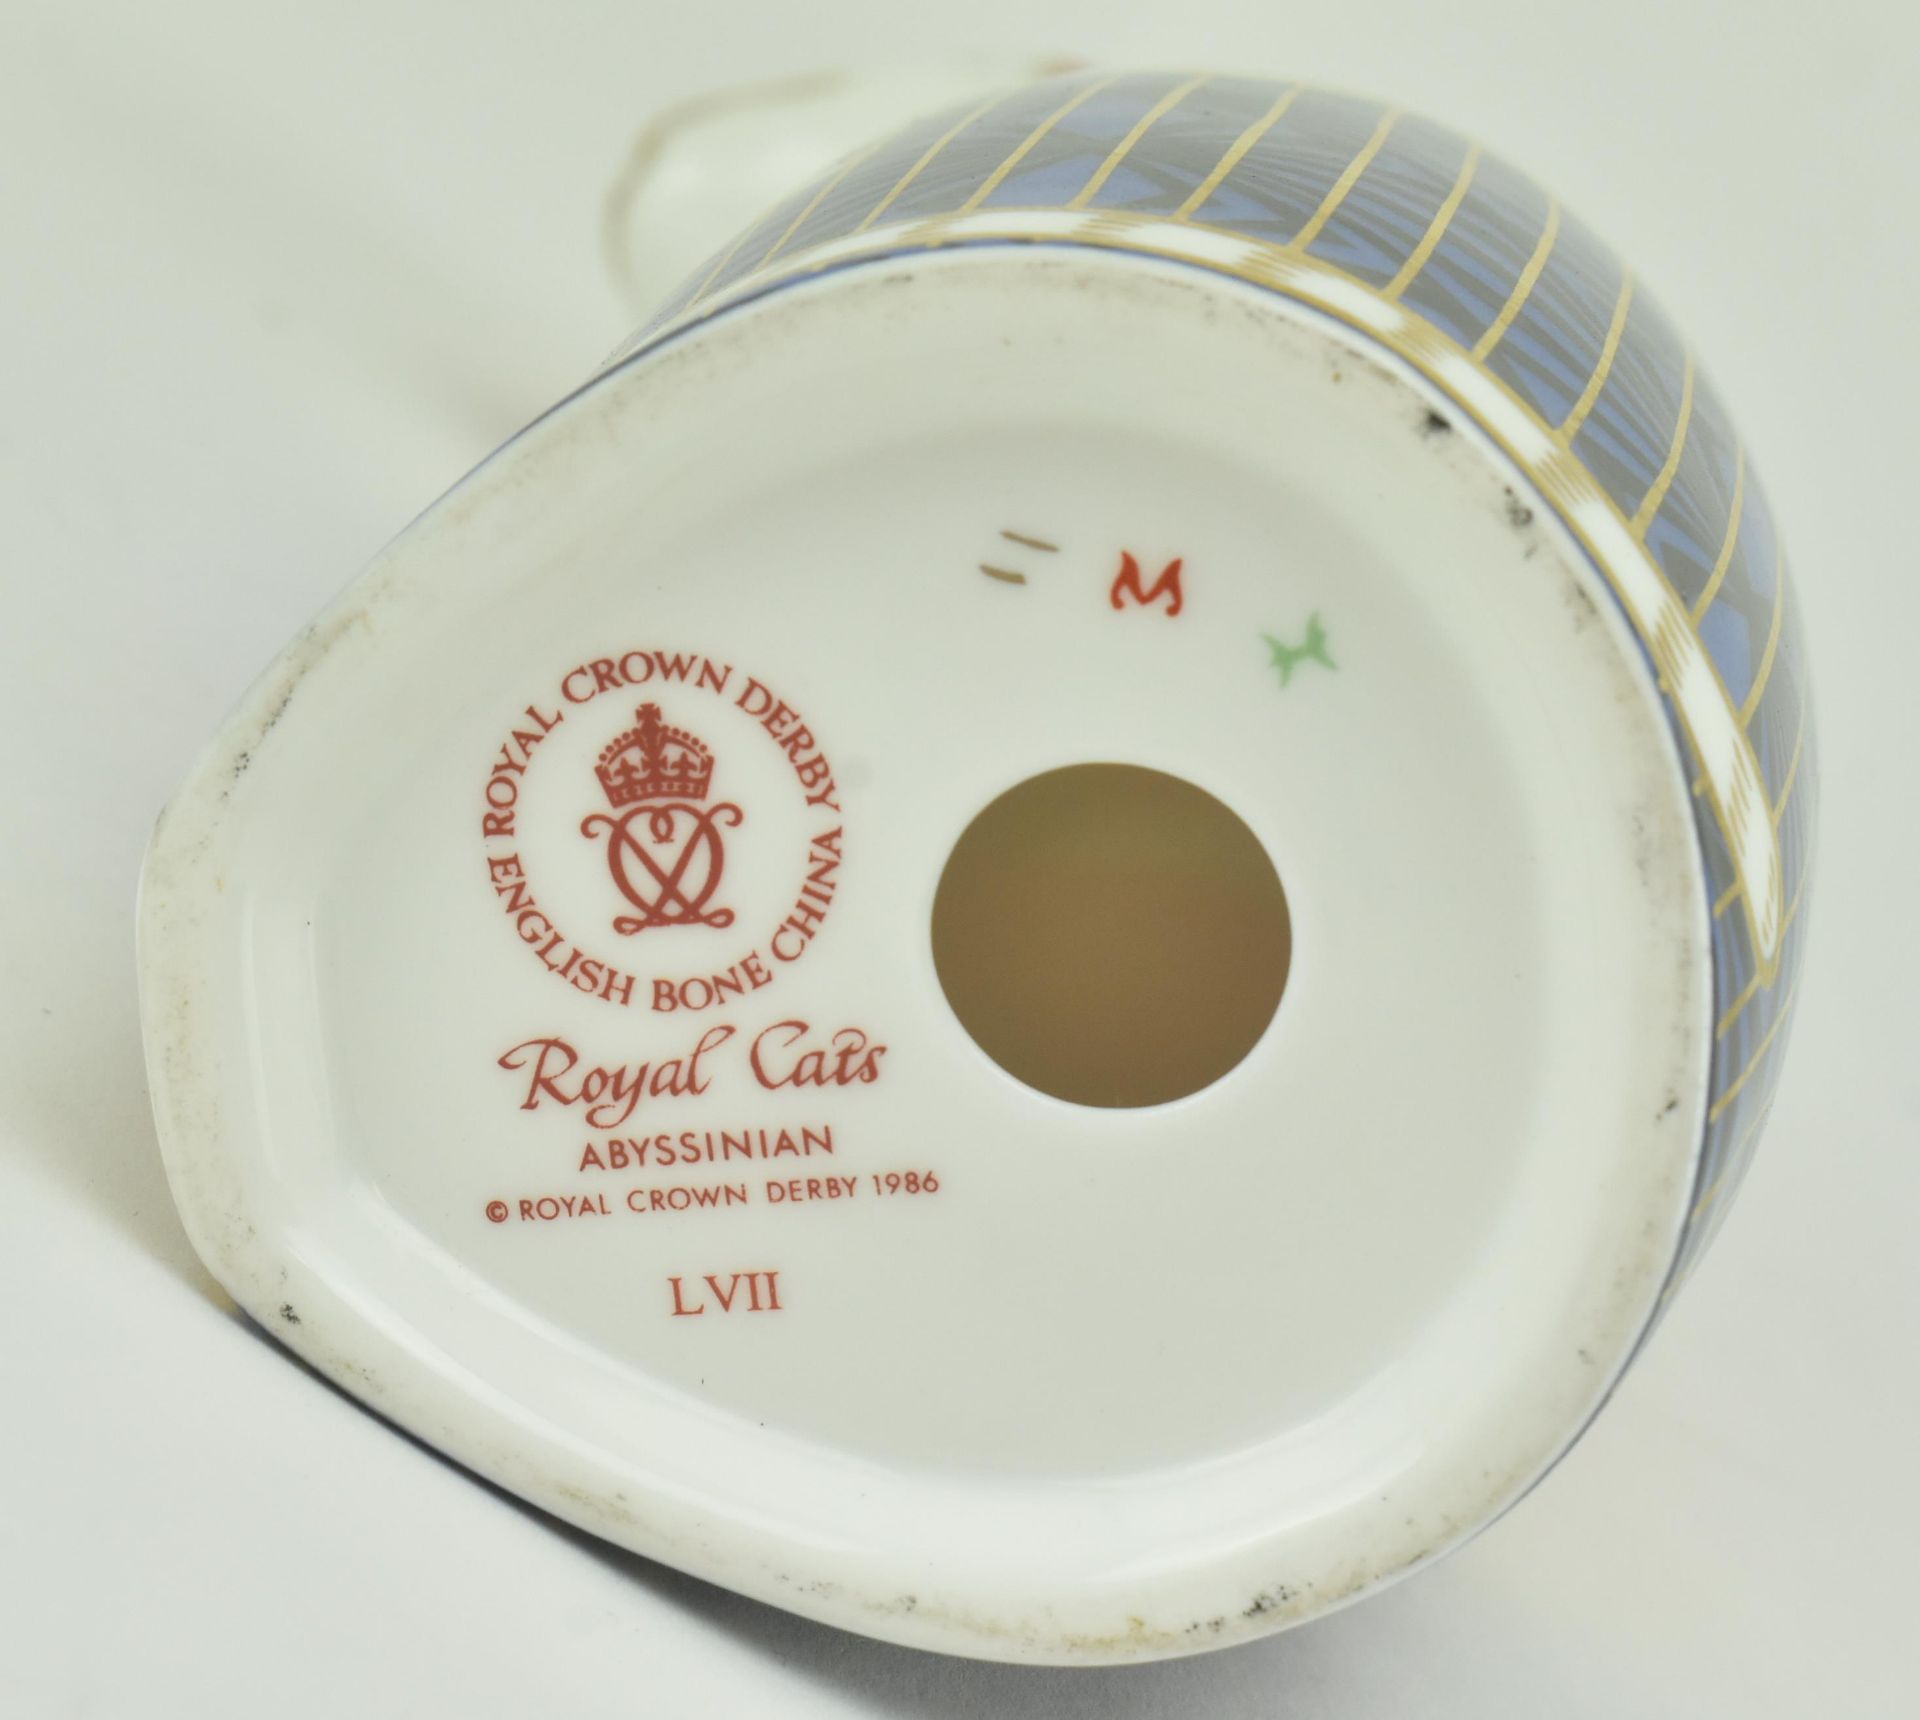 ROYAL CROWN DERBY - ROYAL CATS ABYSSINIAN CHINA PAPERWEIGHTS - Image 5 of 5